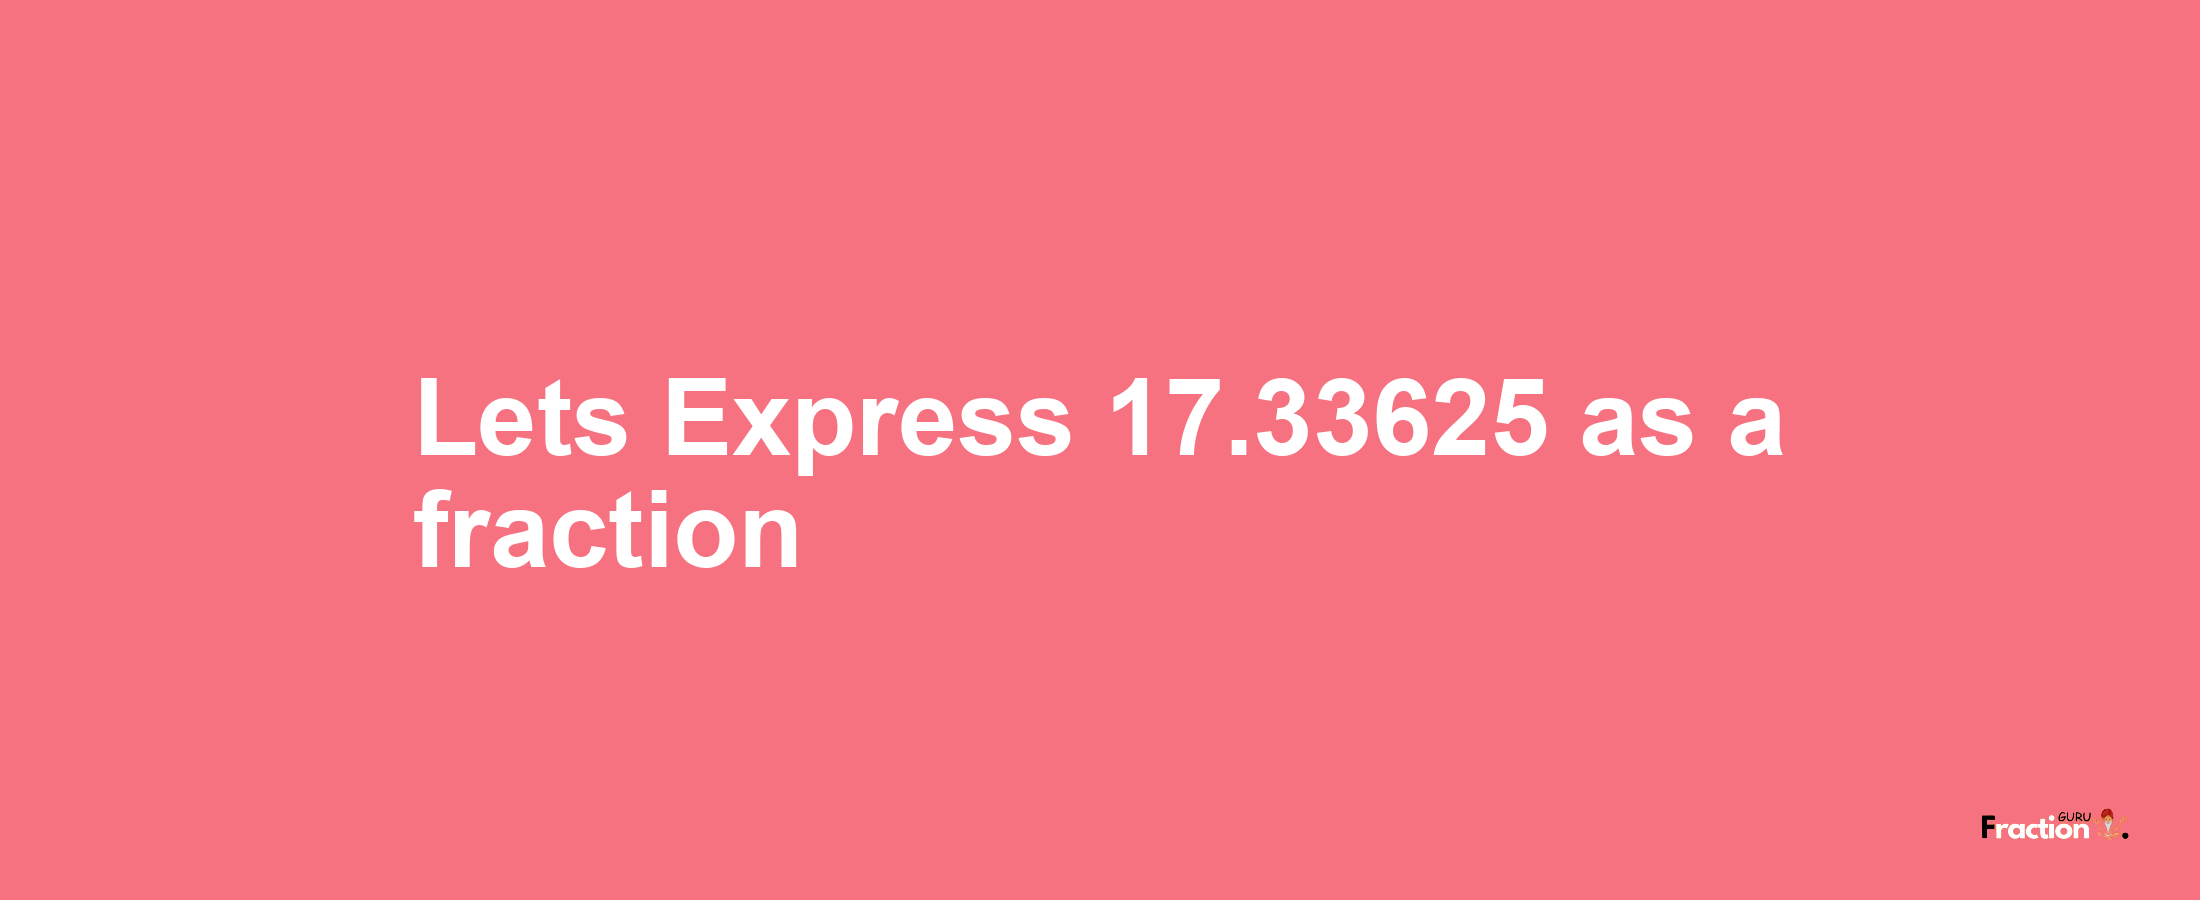 Lets Express 17.33625 as afraction